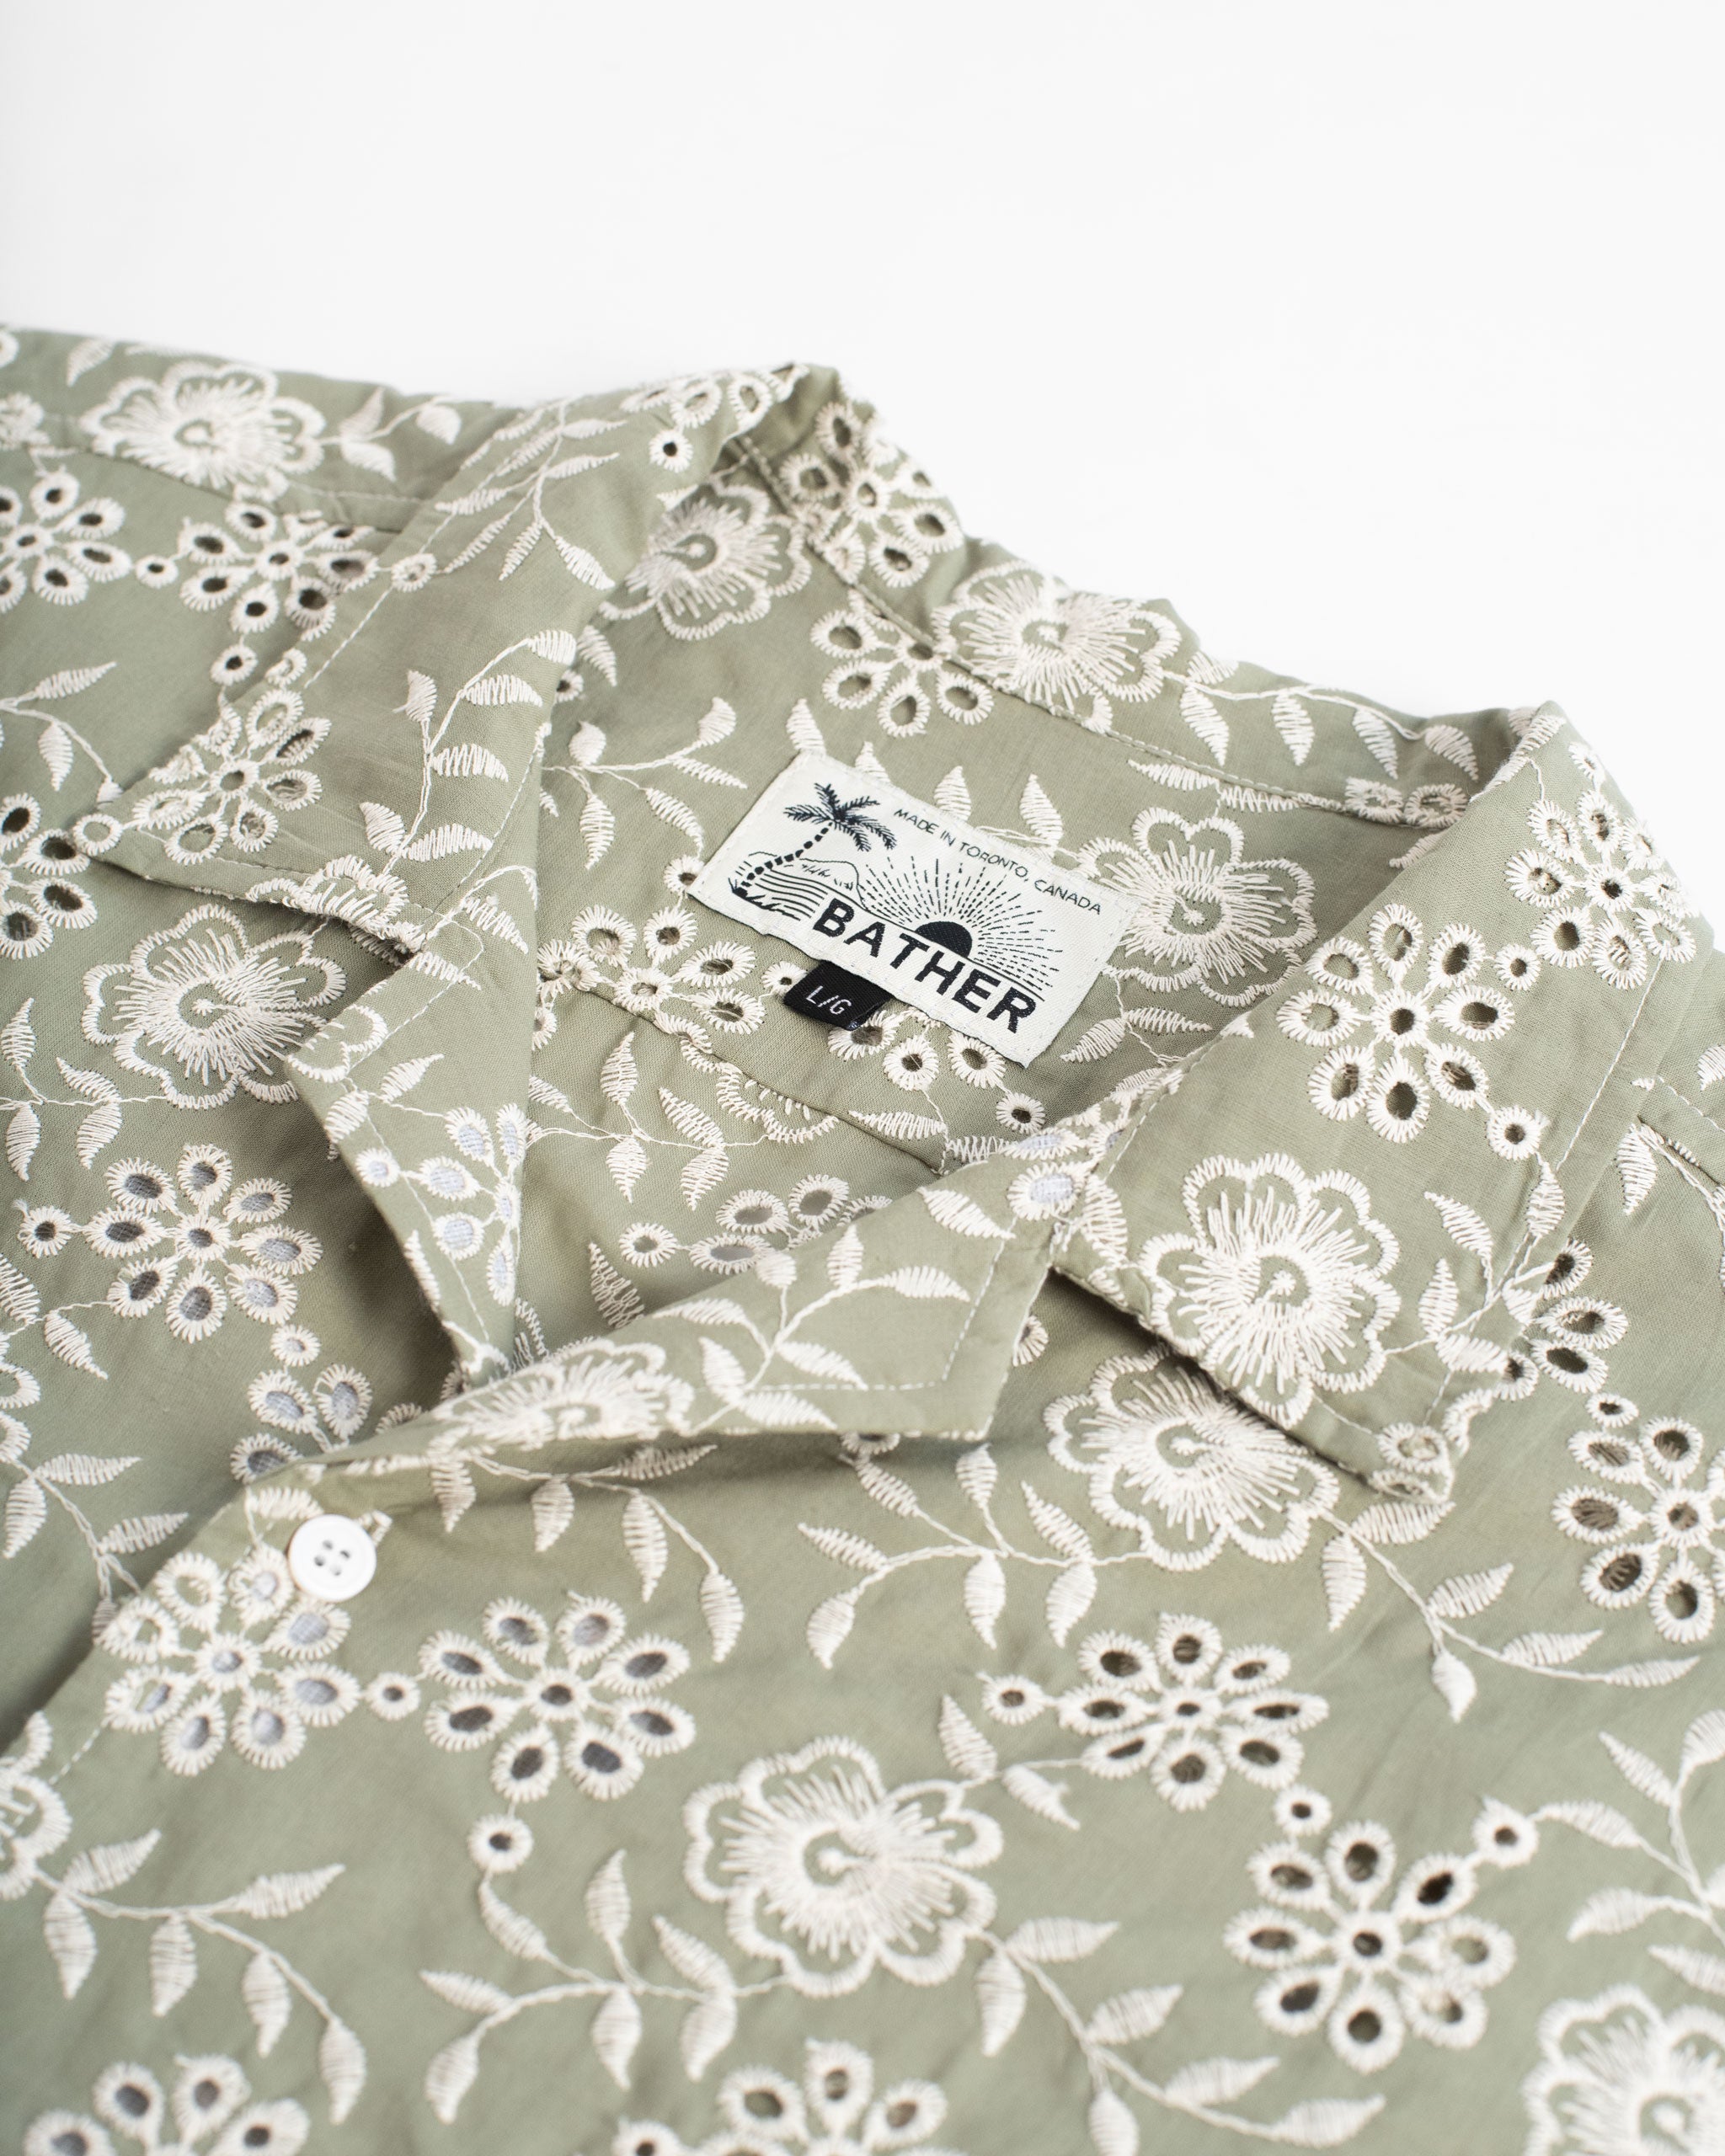 A sage green camp shirt with an all-over embroidered floral pattern collar close up